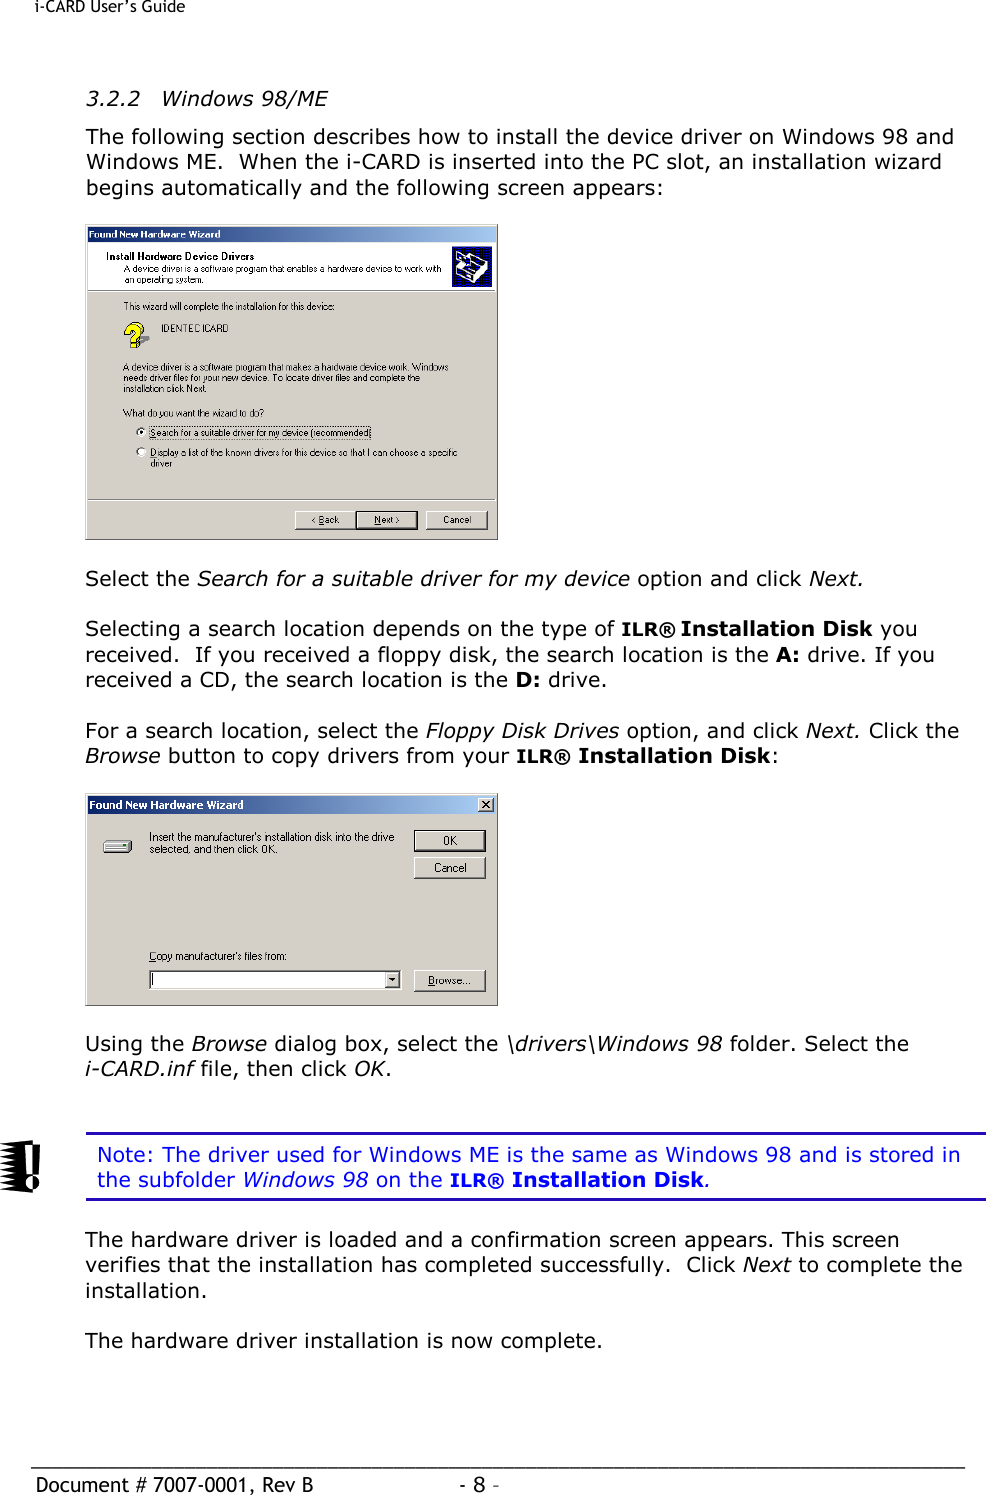  i-CARD User’s Guide   _____________________________________________________________________________________  Document # 7007-0001, Rev B  - 8 –   3.2.2 Windows 98/ME The following section describes how to install the device driver on Windows 98 and Windows ME.  When the i-CARD is inserted into the PC slot, an installation wizard begins automatically and the following screen appears:     Select the Search for a suitable driver for my device option and click Next.  Selecting a search location depends on the type of ILR® Installation Disk you received.  If you received a floppy disk, the search location is the A: drive. If you received a CD, the search location is the D: drive.   For a search location, select the Floppy Disk Drives option, and click Next. Click the Browse button to copy drivers from your ILR® Installation Disk:    Using the Browse dialog box, select the \drivers\Windows 98 folder. Select the i-CARD.inf file, then click OK.    Note: The driver used for Windows ME is the same as Windows 98 and is stored in the subfolder Windows 98 on the ILR® Installation Disk.  The hardware driver is loaded and a confirmation screen appears. This screen verifies that the installation has completed successfully.  Click Next to complete the installation.  The hardware driver installation is now complete.   